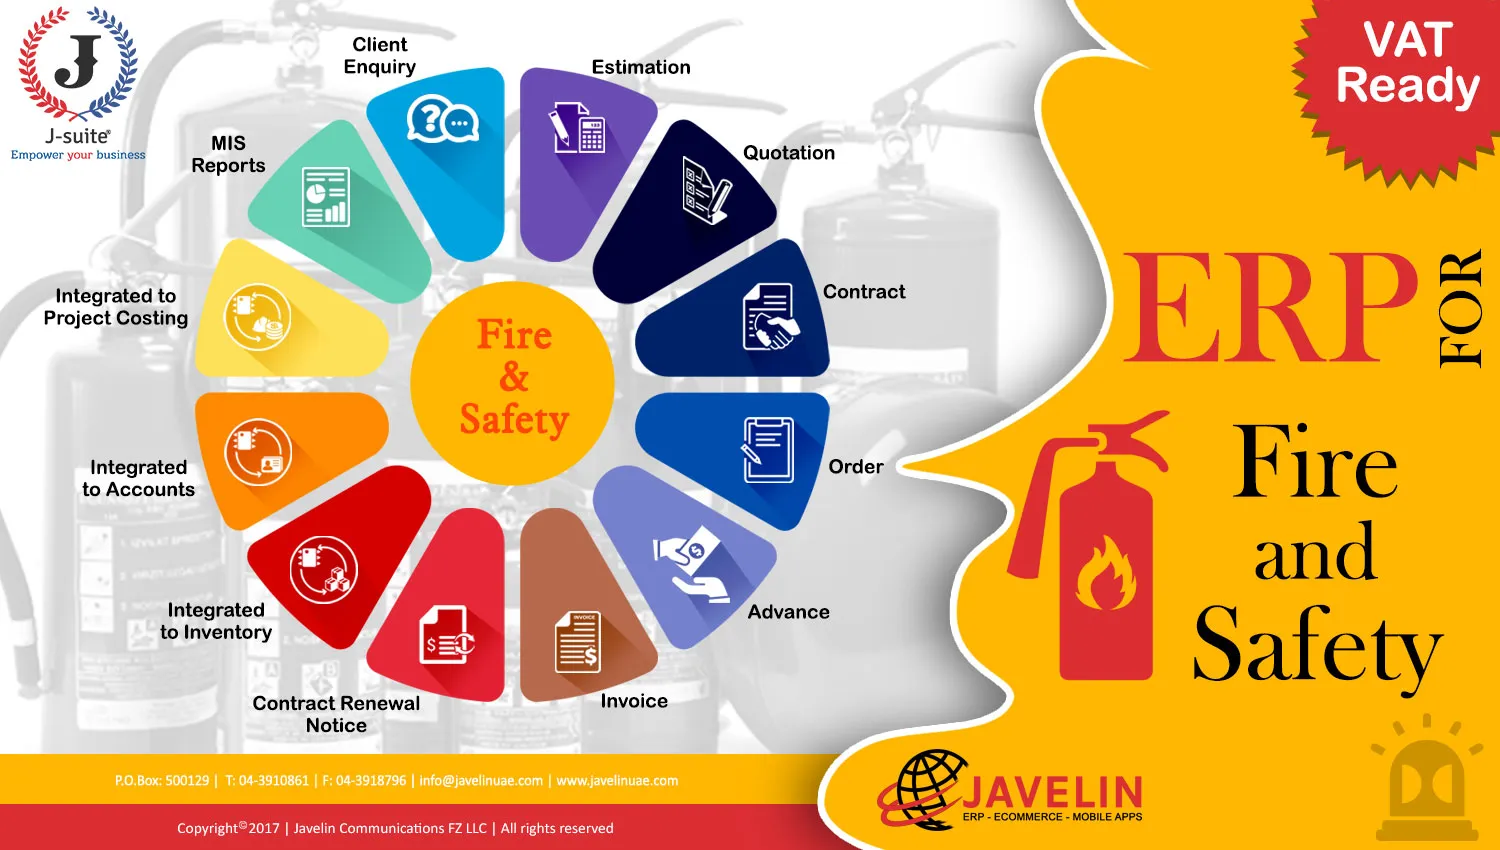 VAT Ready ERP Solutions for Fire & Safety Companies